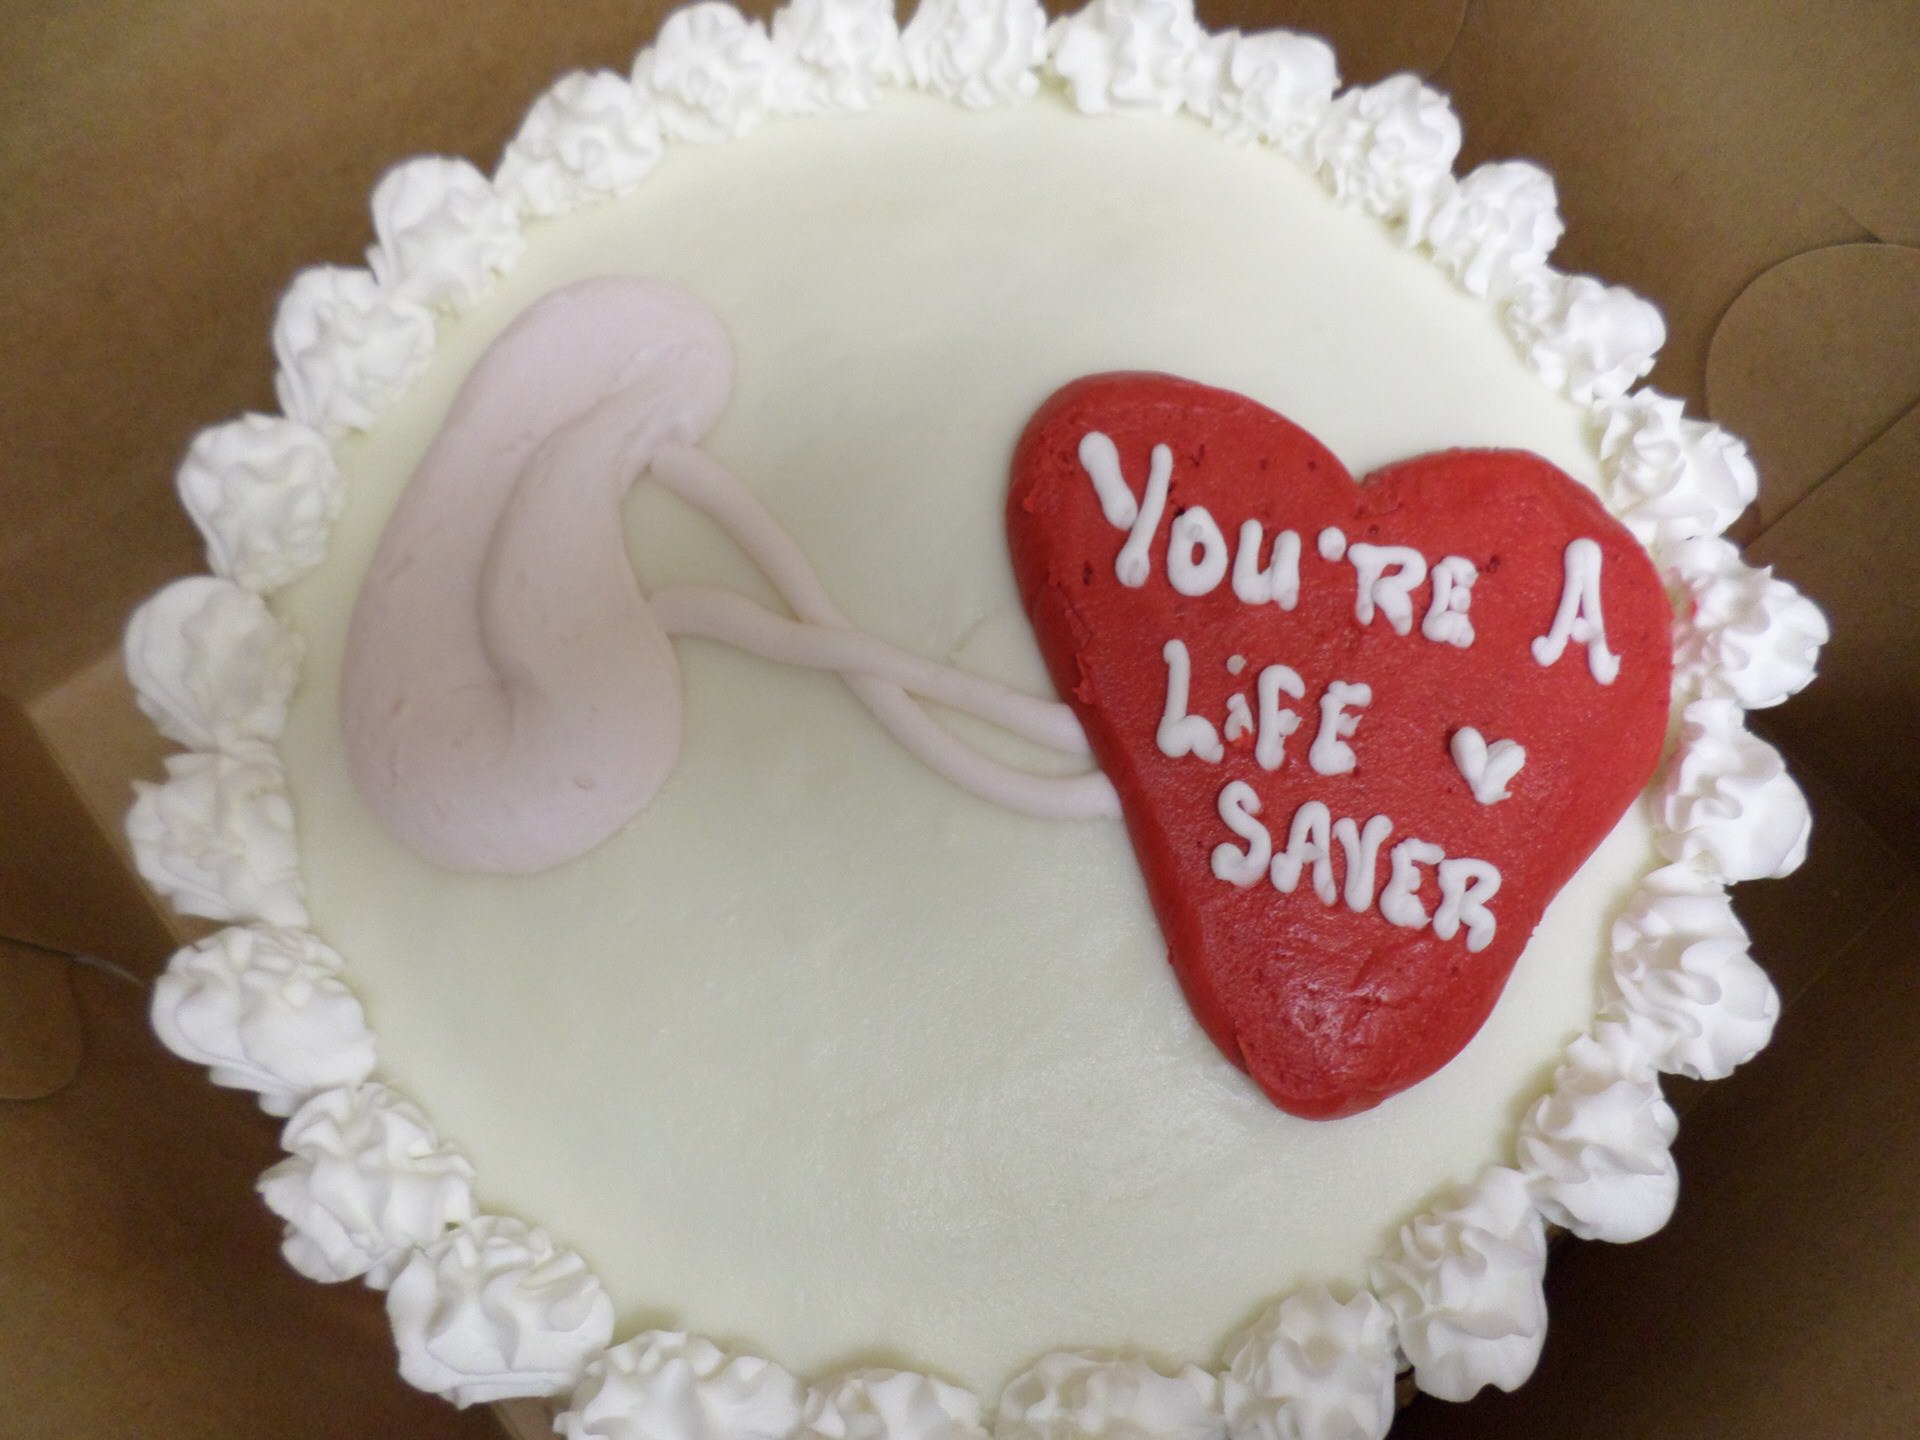 Kidney cake given to Alexis by Hickory Village Memory Care